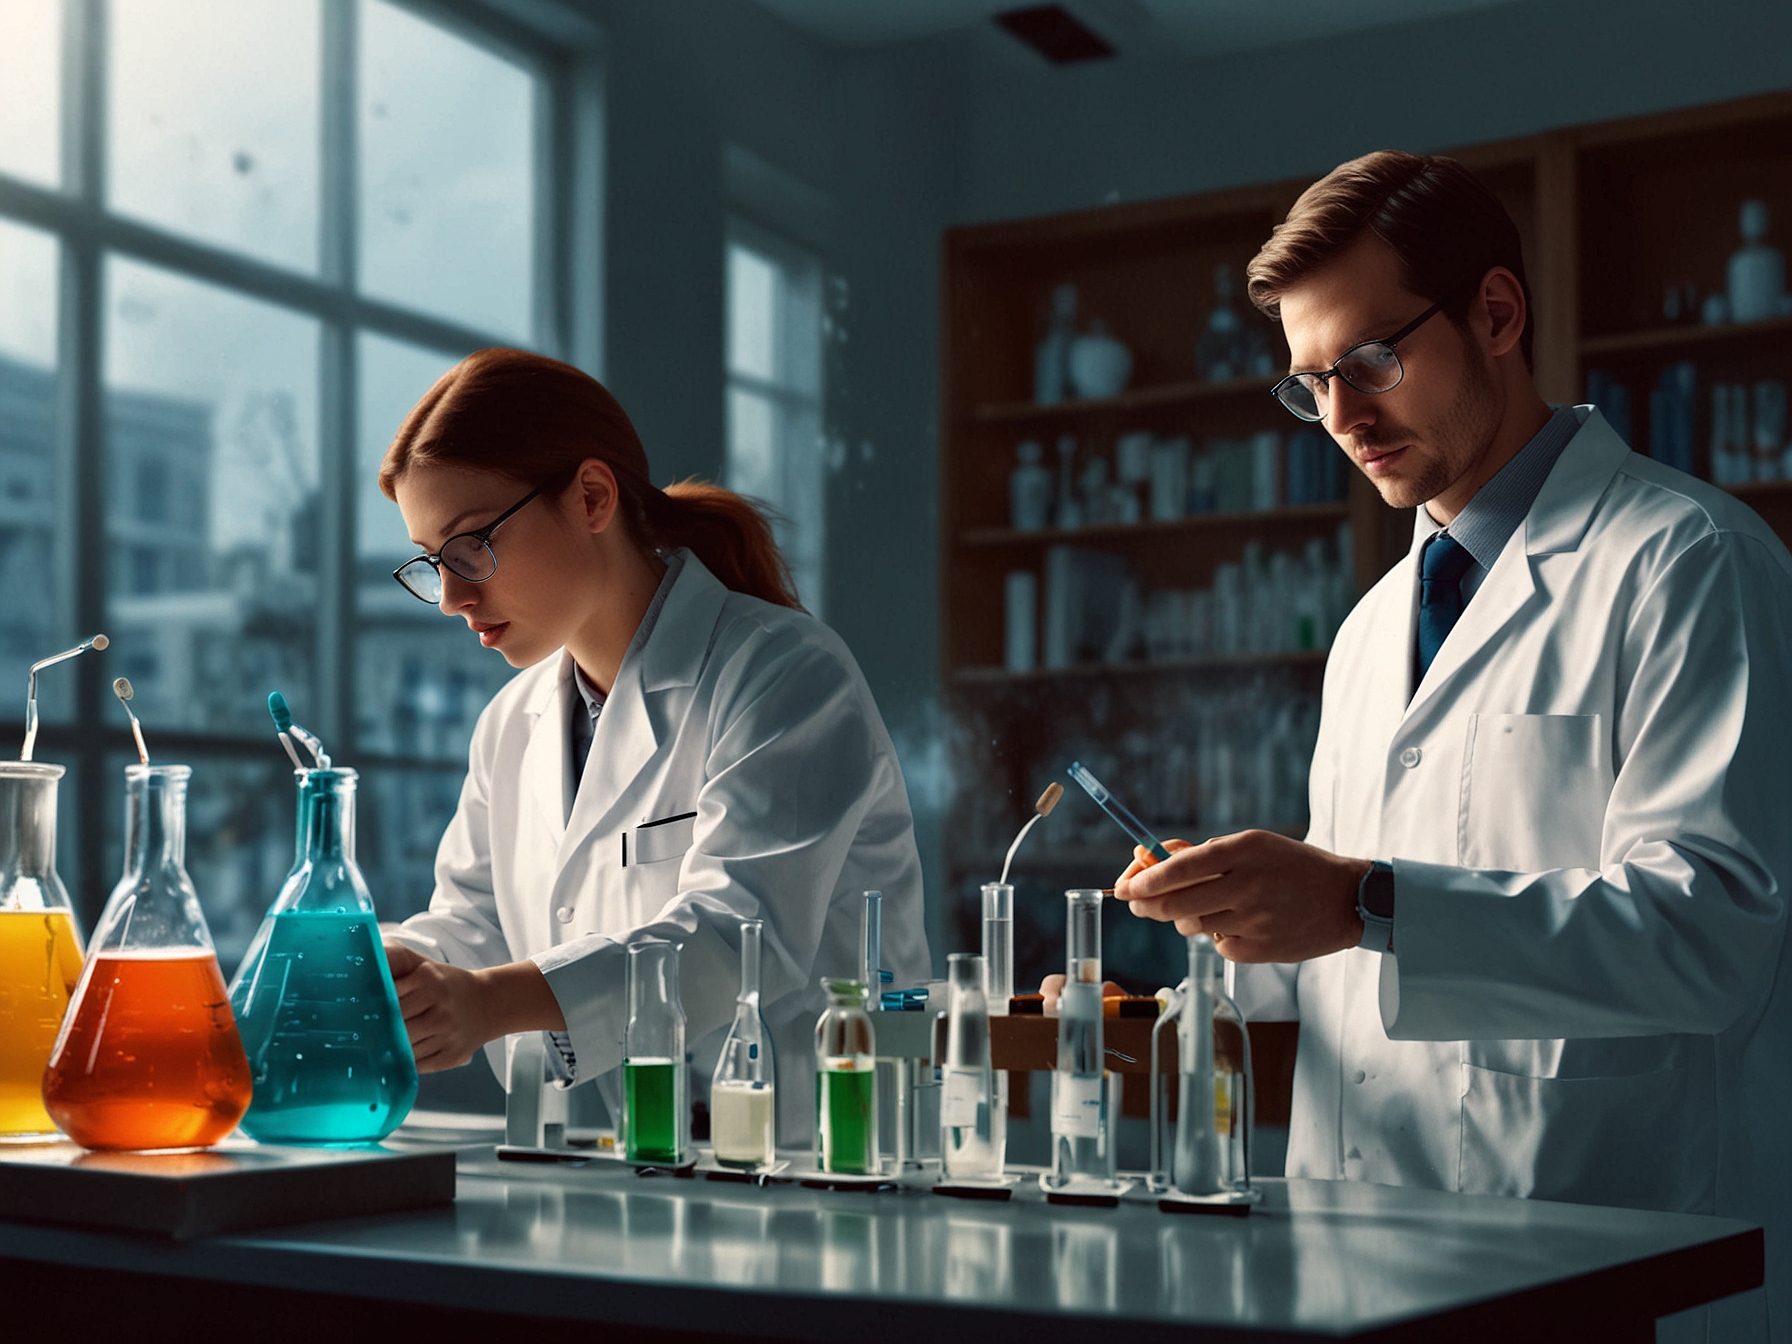 A team of researchers in a laboratory setting, showcasing their innovative enzymatic platform for converting fatty acids into 1-alkenes, illustrating the multidisciplinary approach.